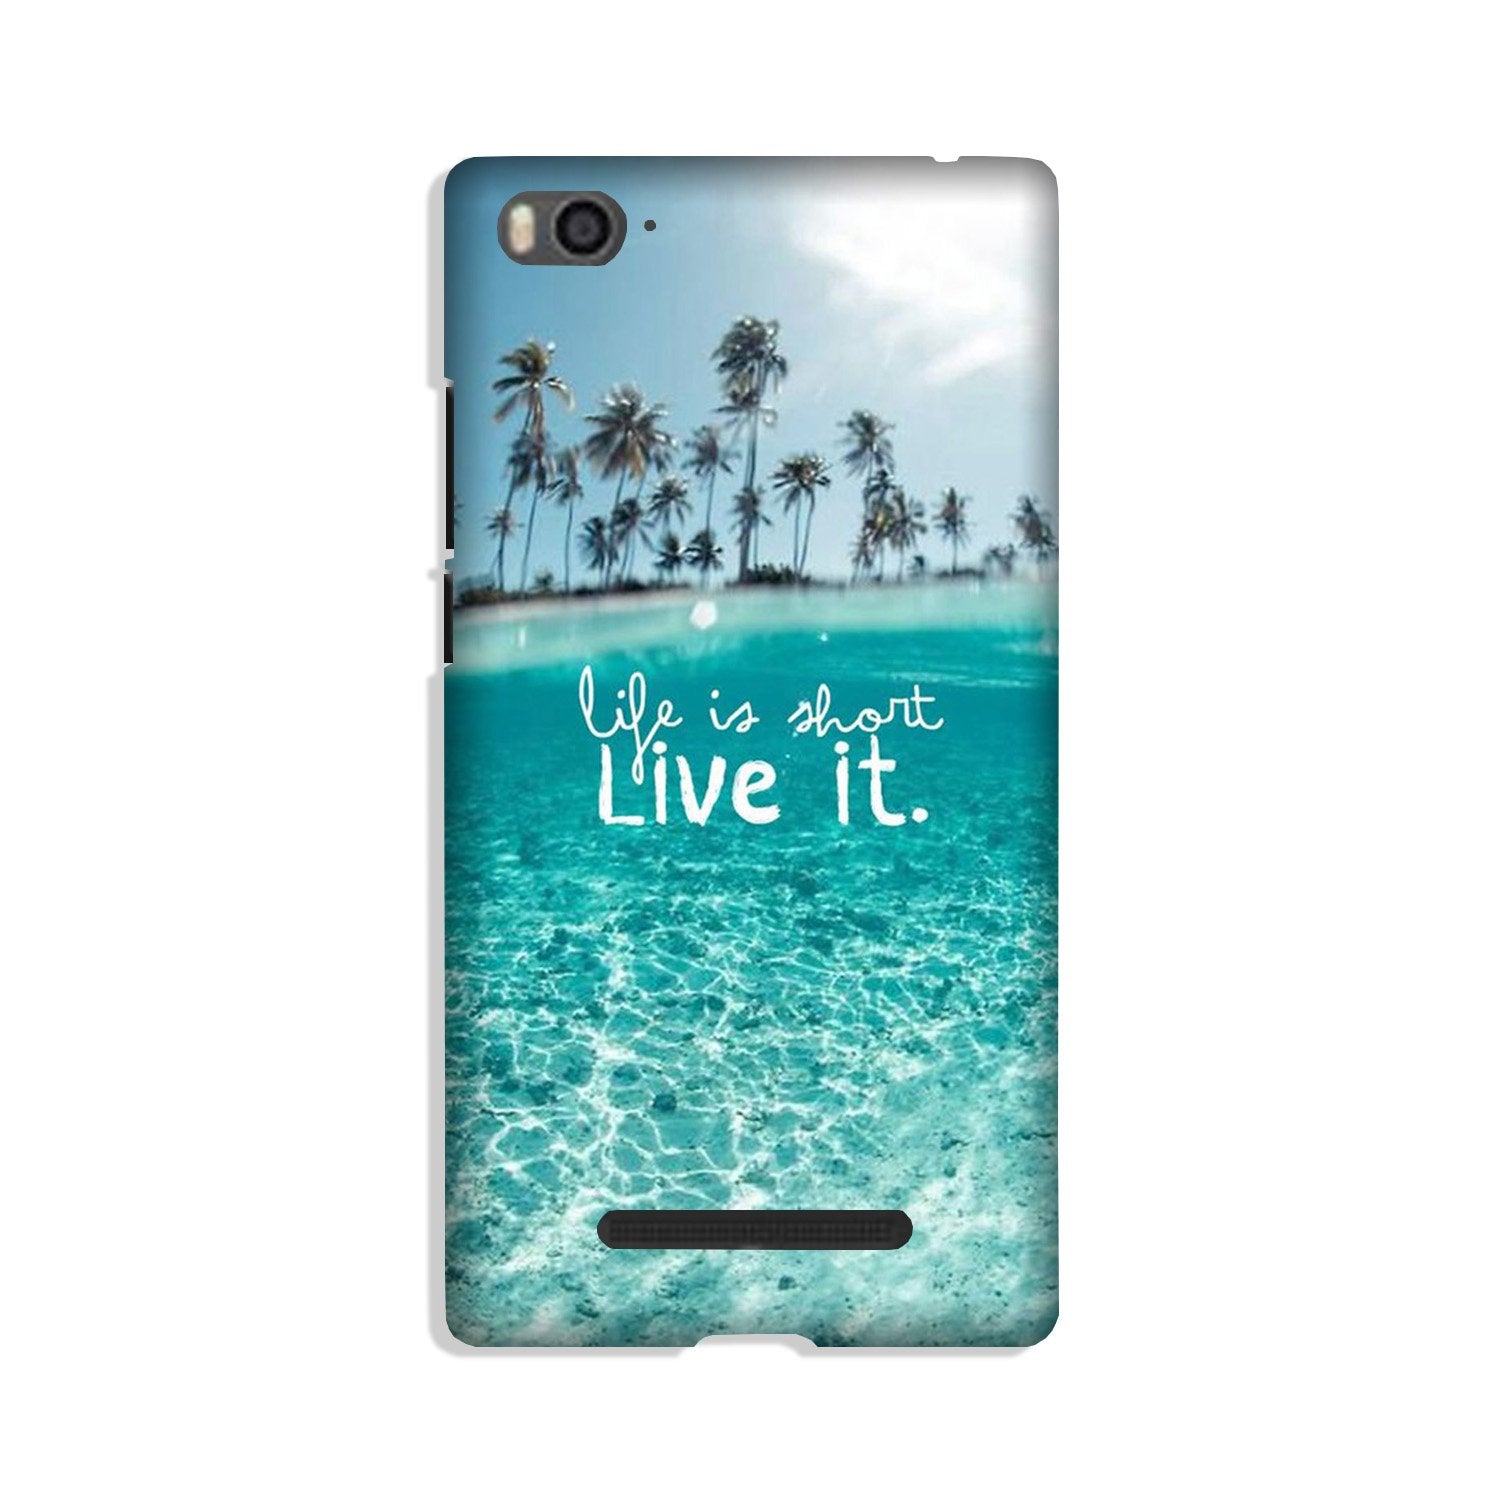 Life is short live it Case for Redmi 4A